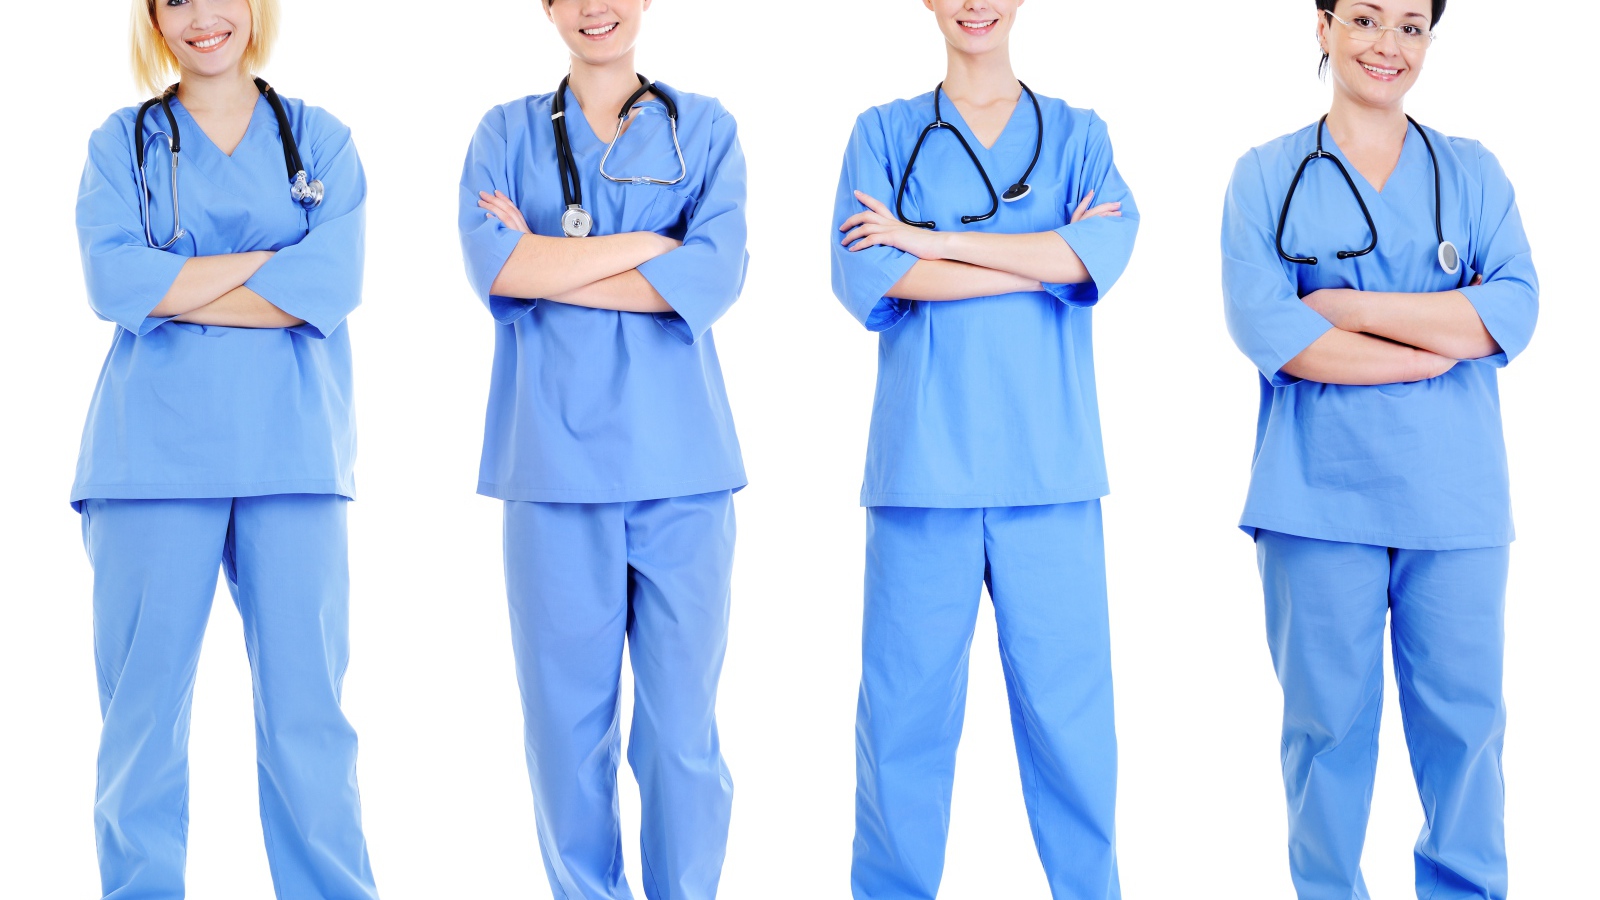 Team of doctors in uniform on white background